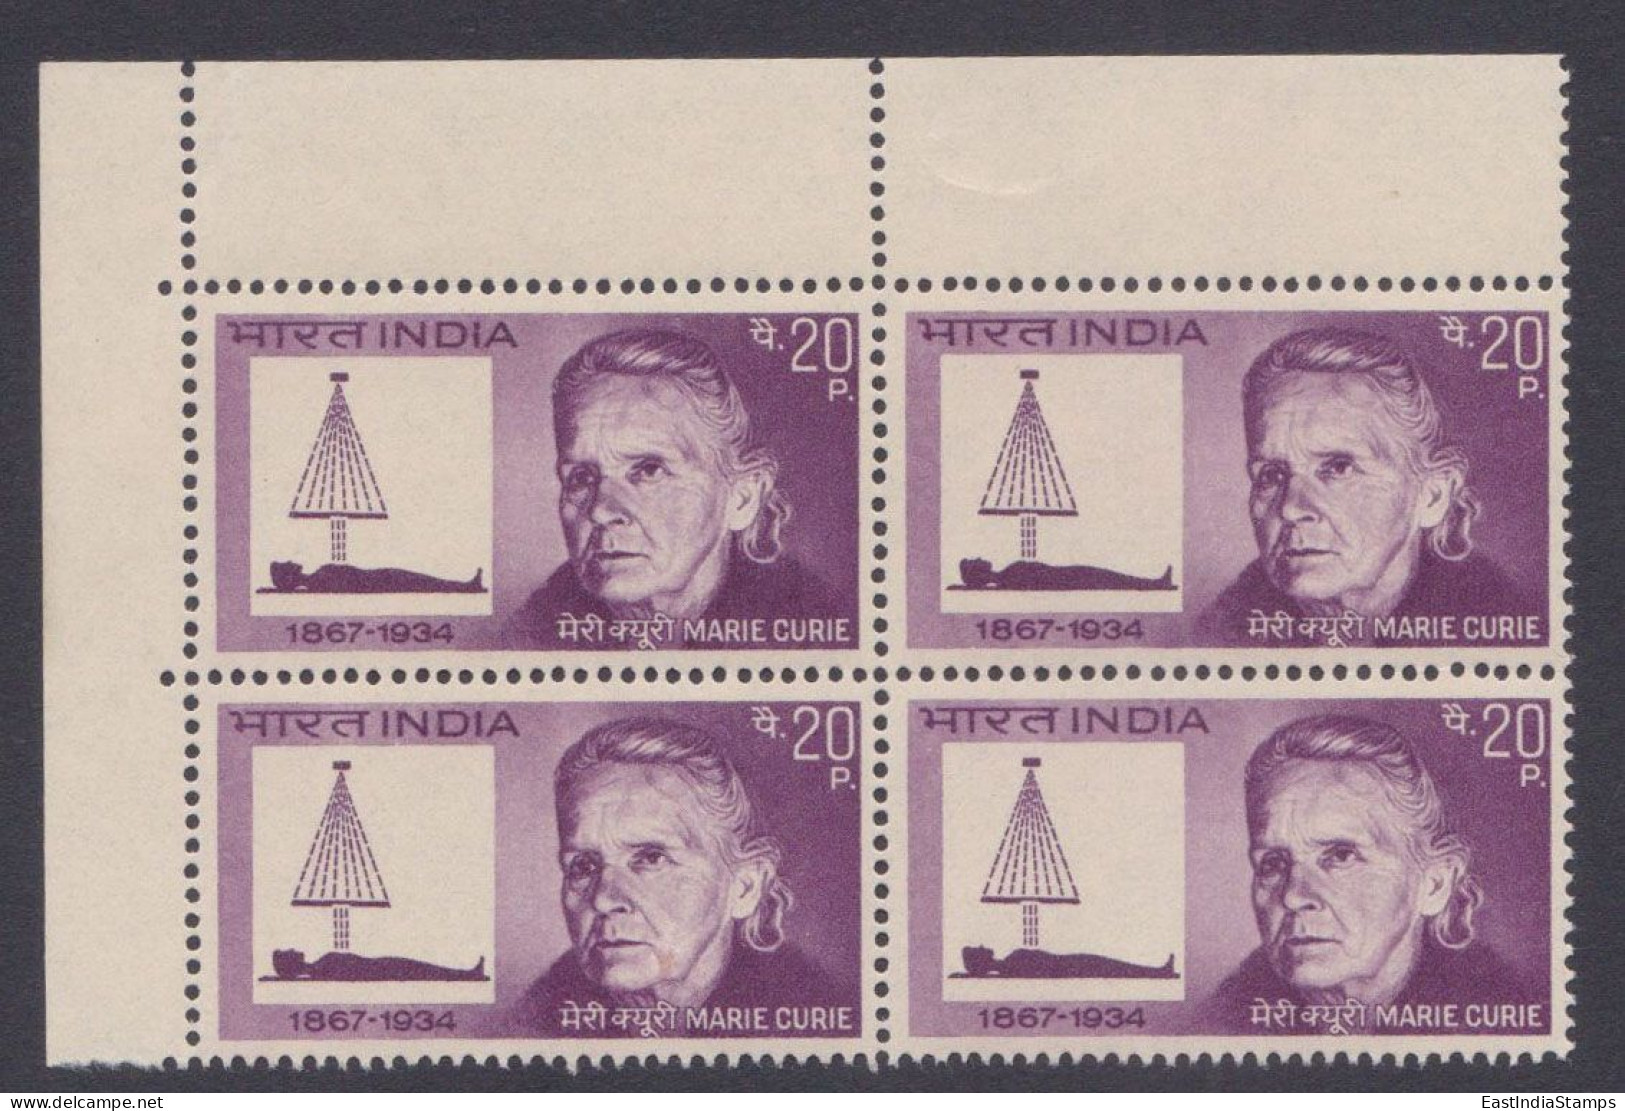 Inde India 1968 MNH Marie Curie, Polish French Chemist, Physicist, Nobel Prize Winner, Science, Scientist, Physics Block - Nuovi